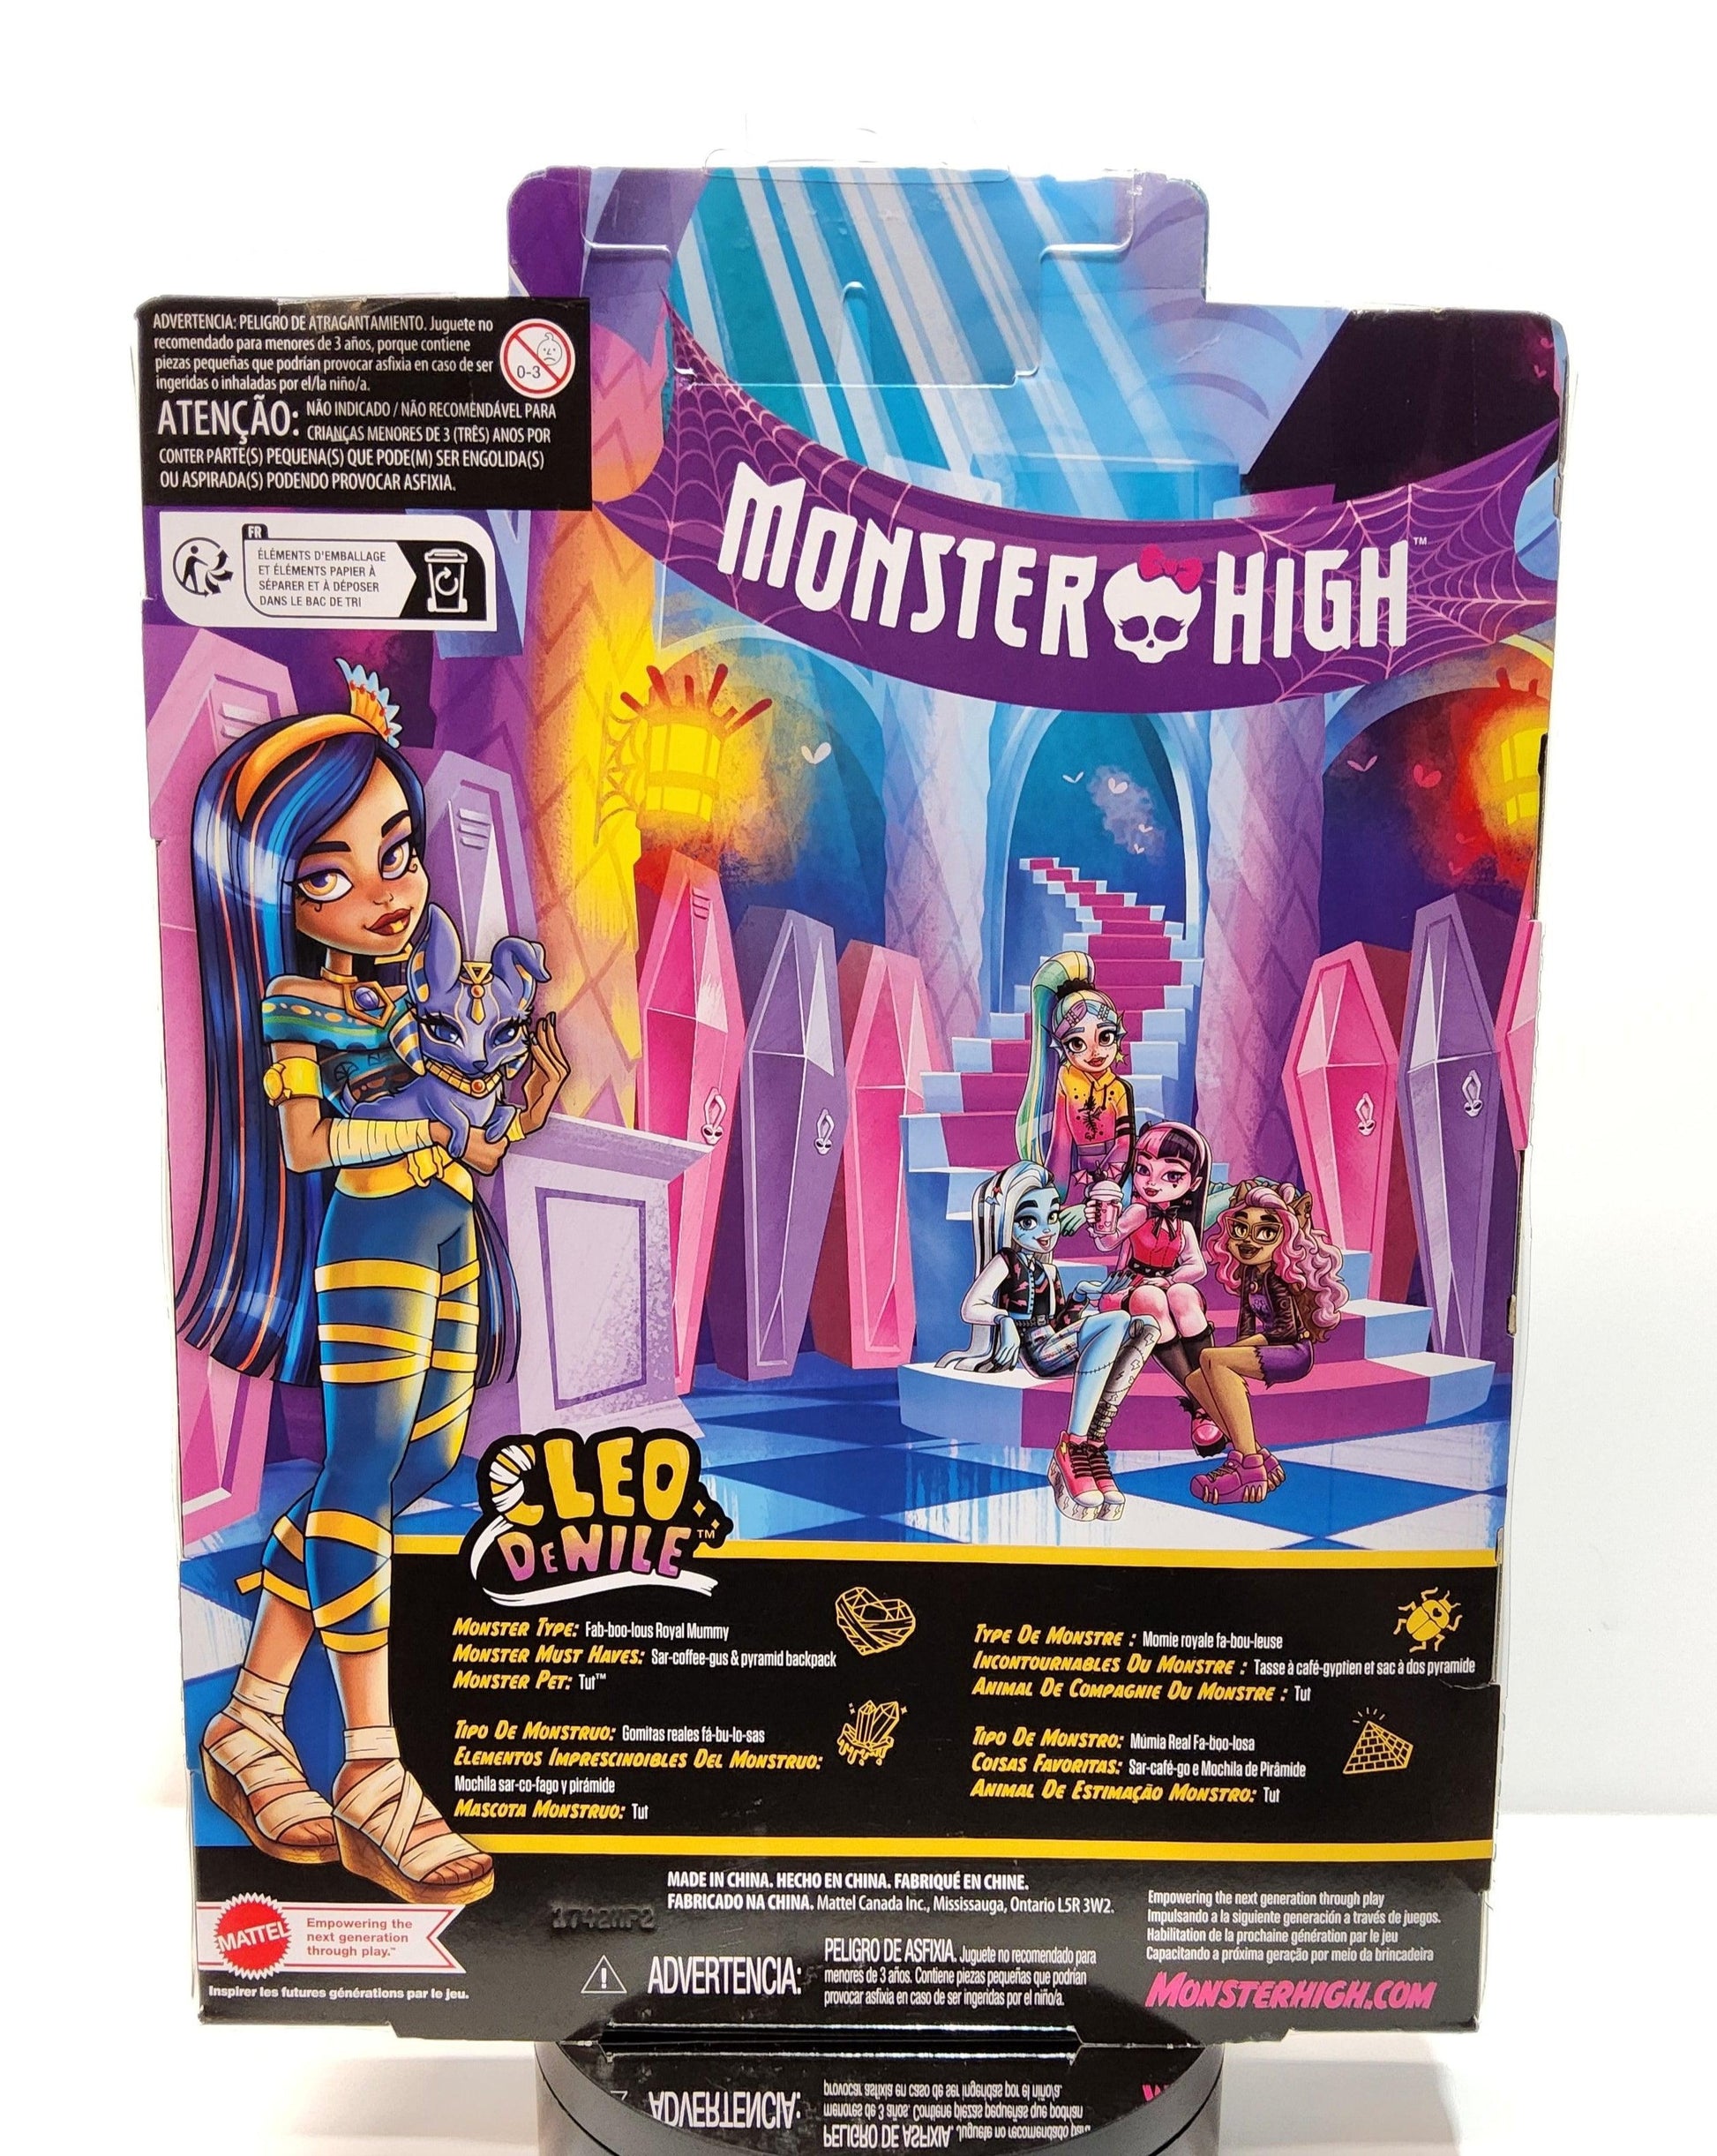 Monster High Cleo DeNile 11" Doll & Pet Tut With Accessories - Logan's Toy Chest